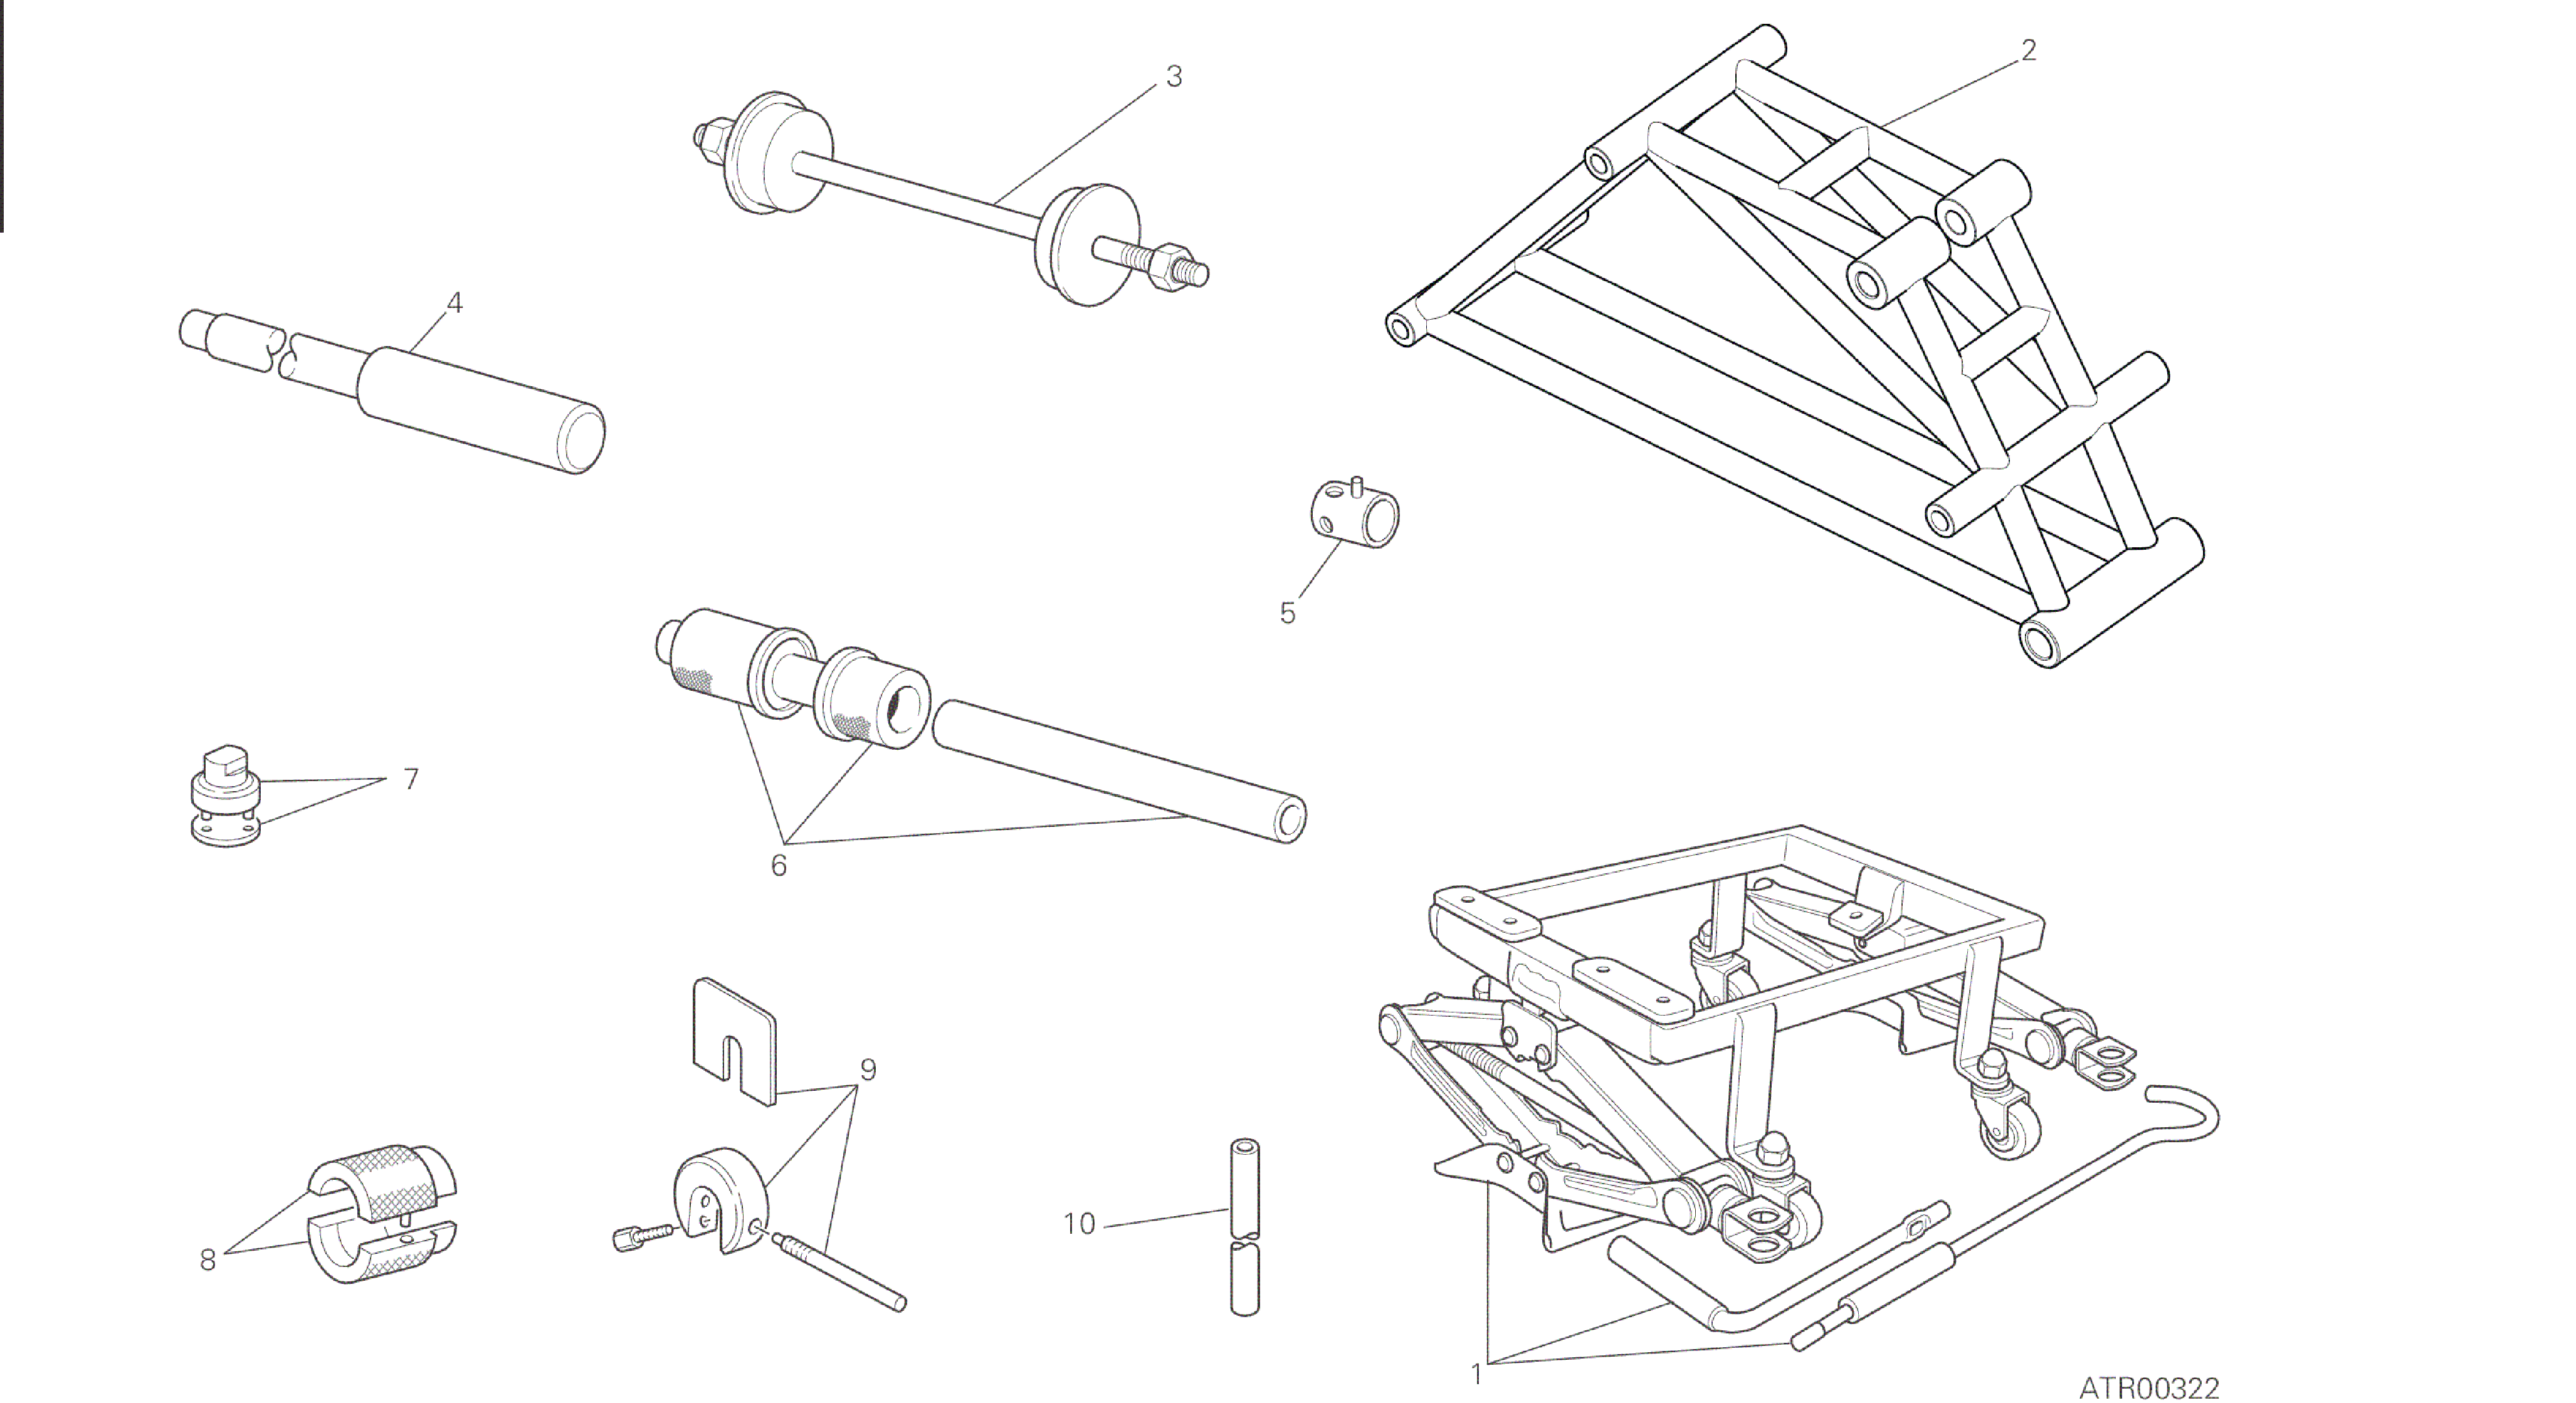 DRAWING 01A - WORKSHOP SERVICE TOOLS, FRAME [MOD:M 821]GROUP TOOLS